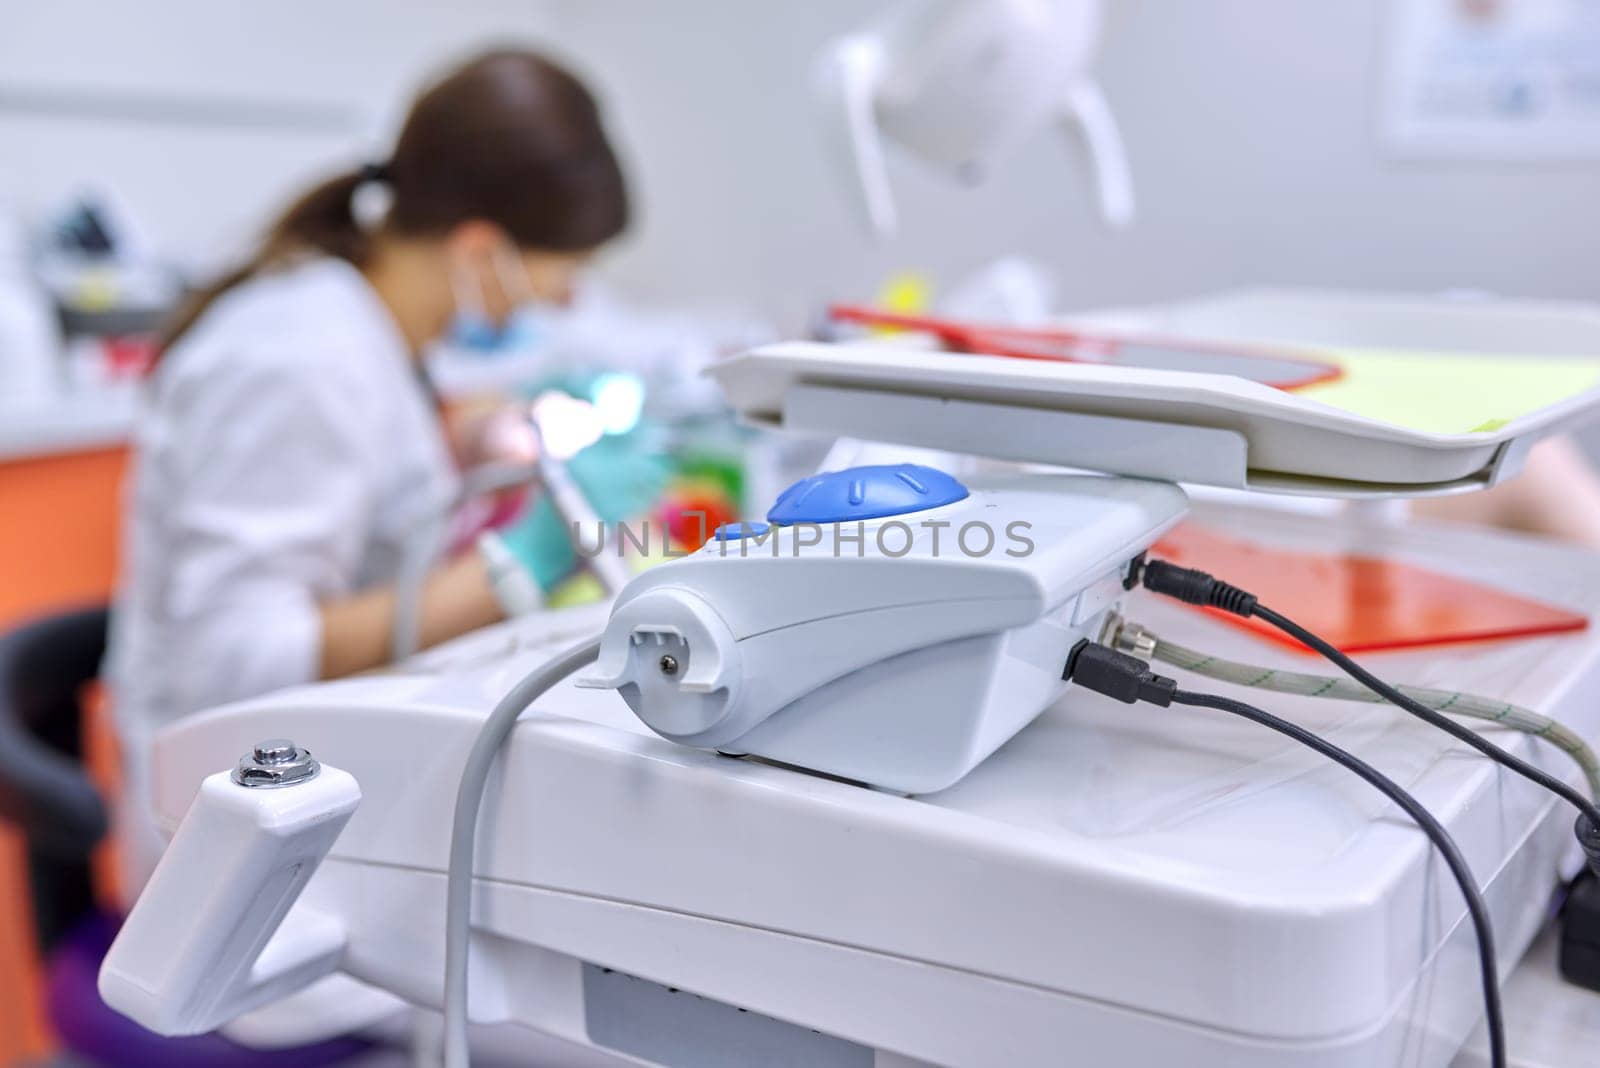 Dental office background, professional equipment, doctor treating teeth to patient out of focus.